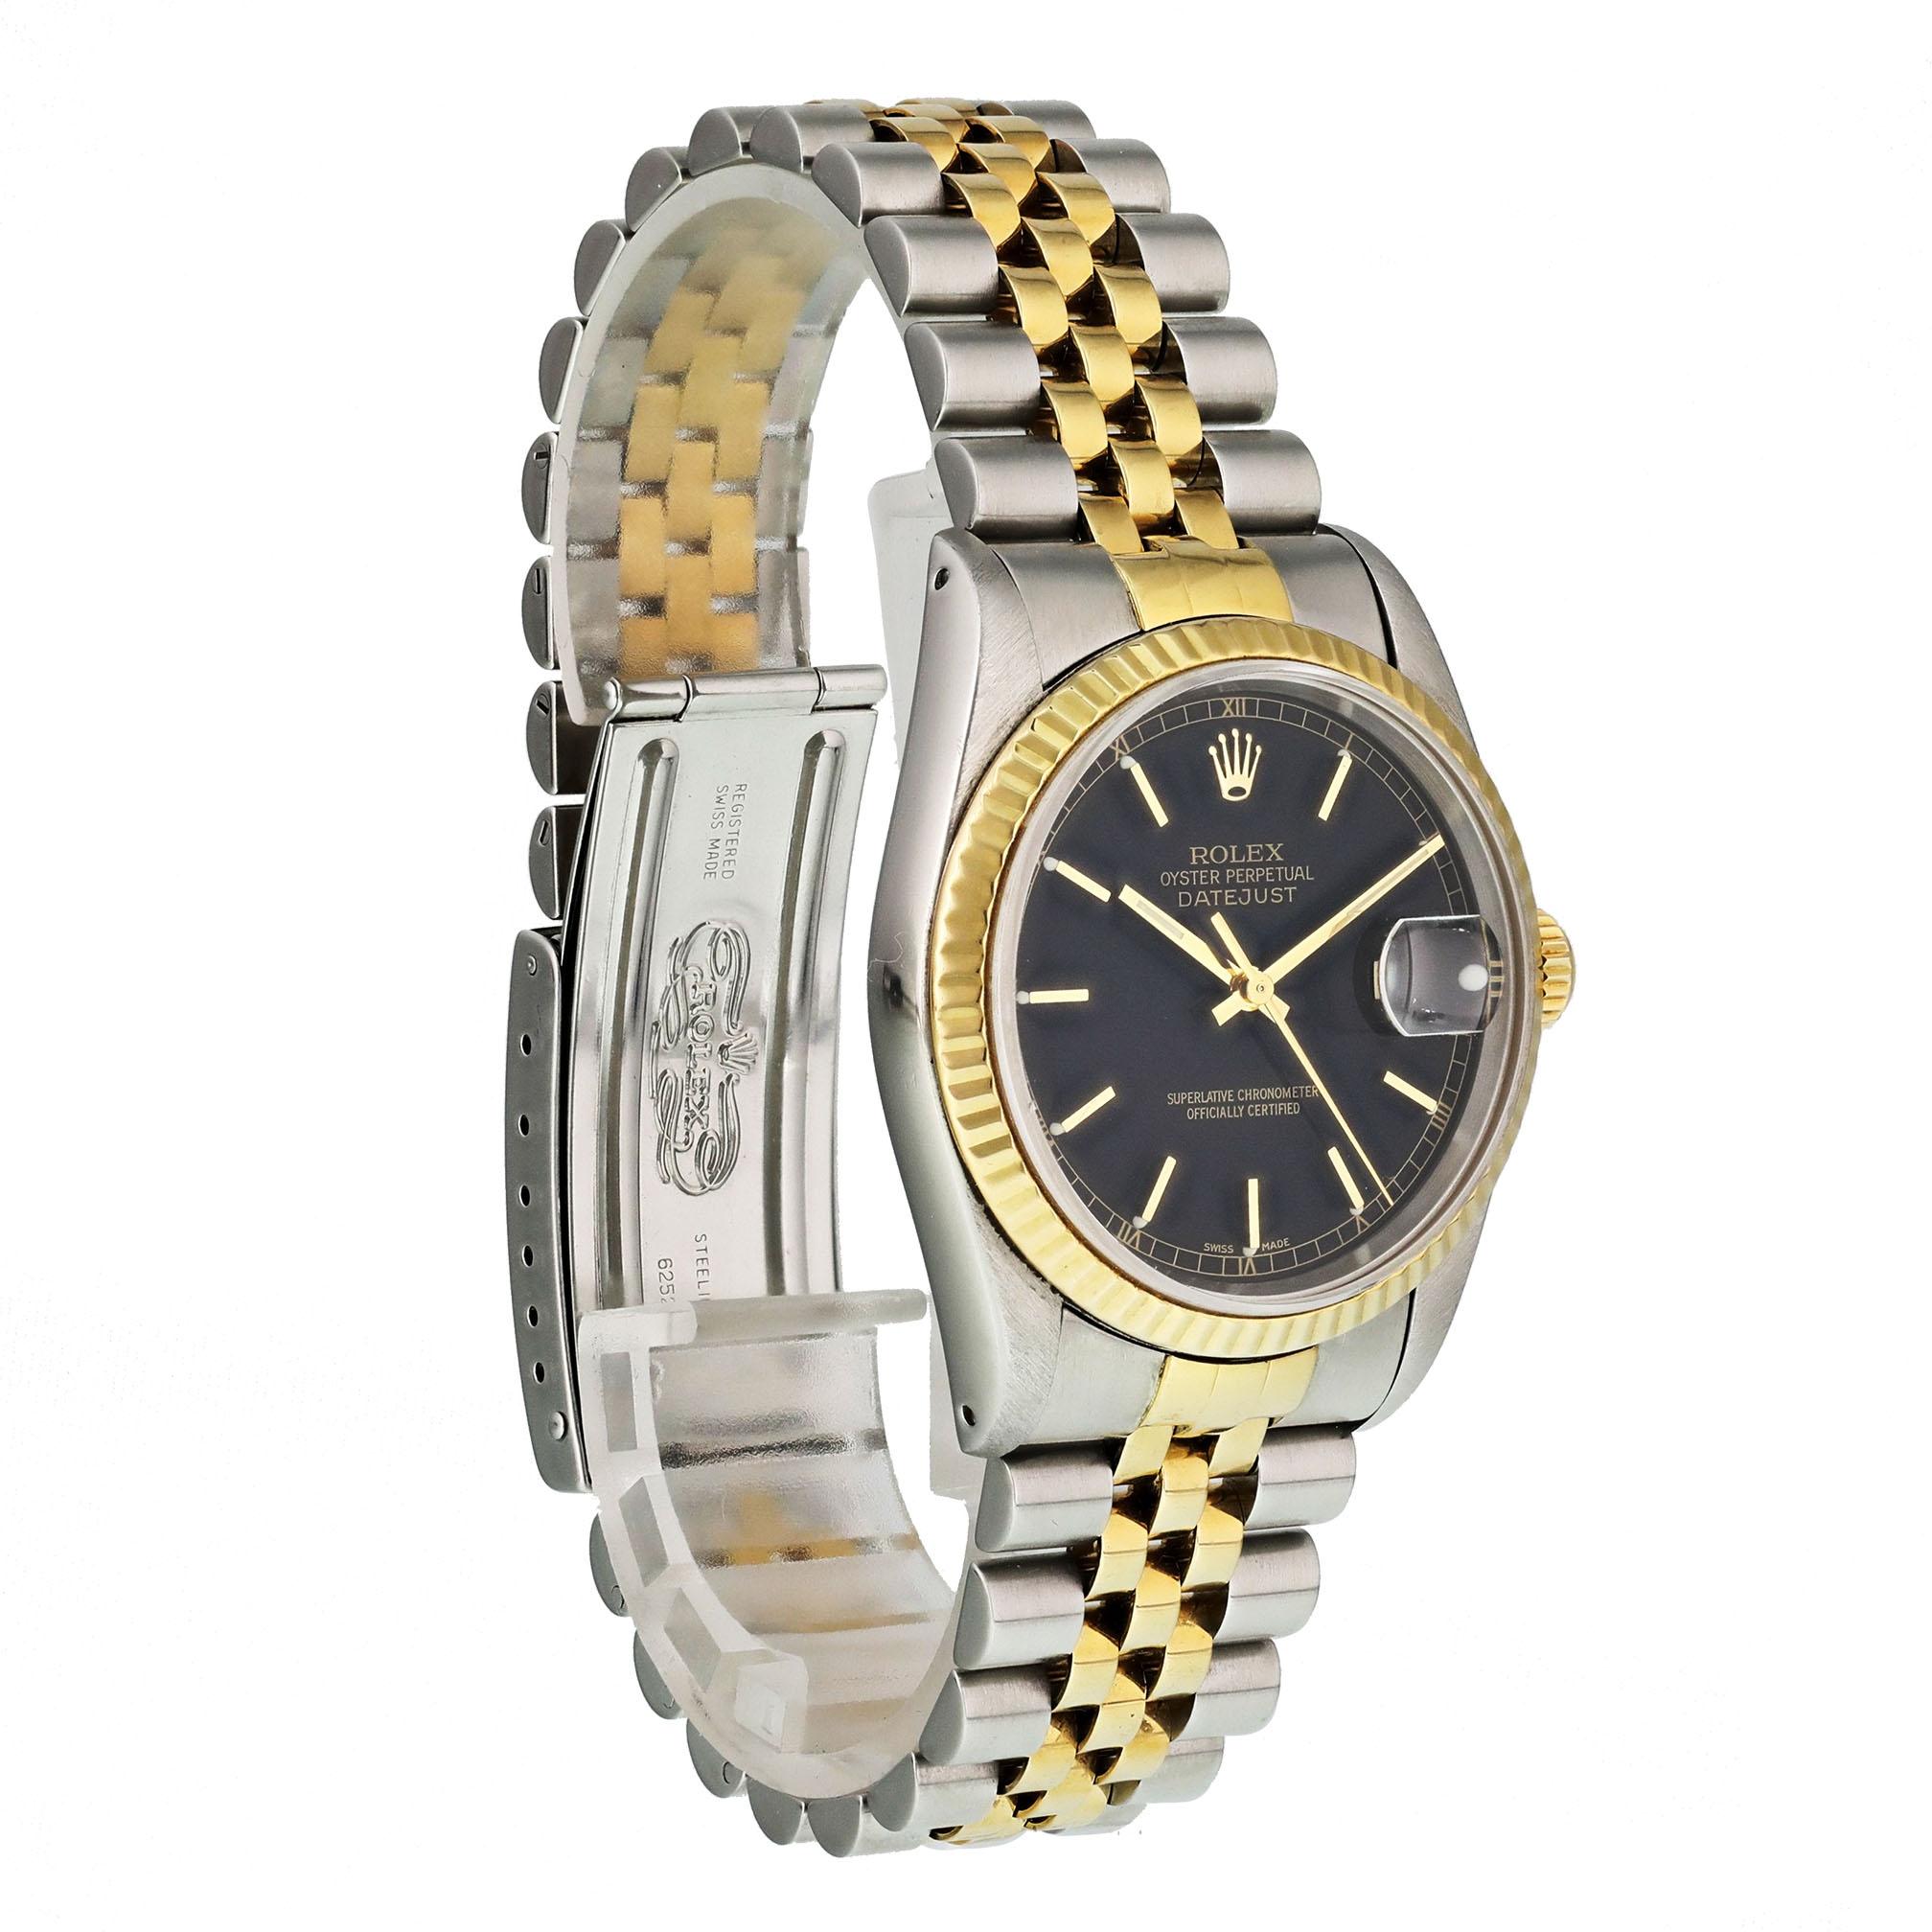 Rolex Datejust 16233 Men’s Watch In Excellent Condition For Sale In New York, NY